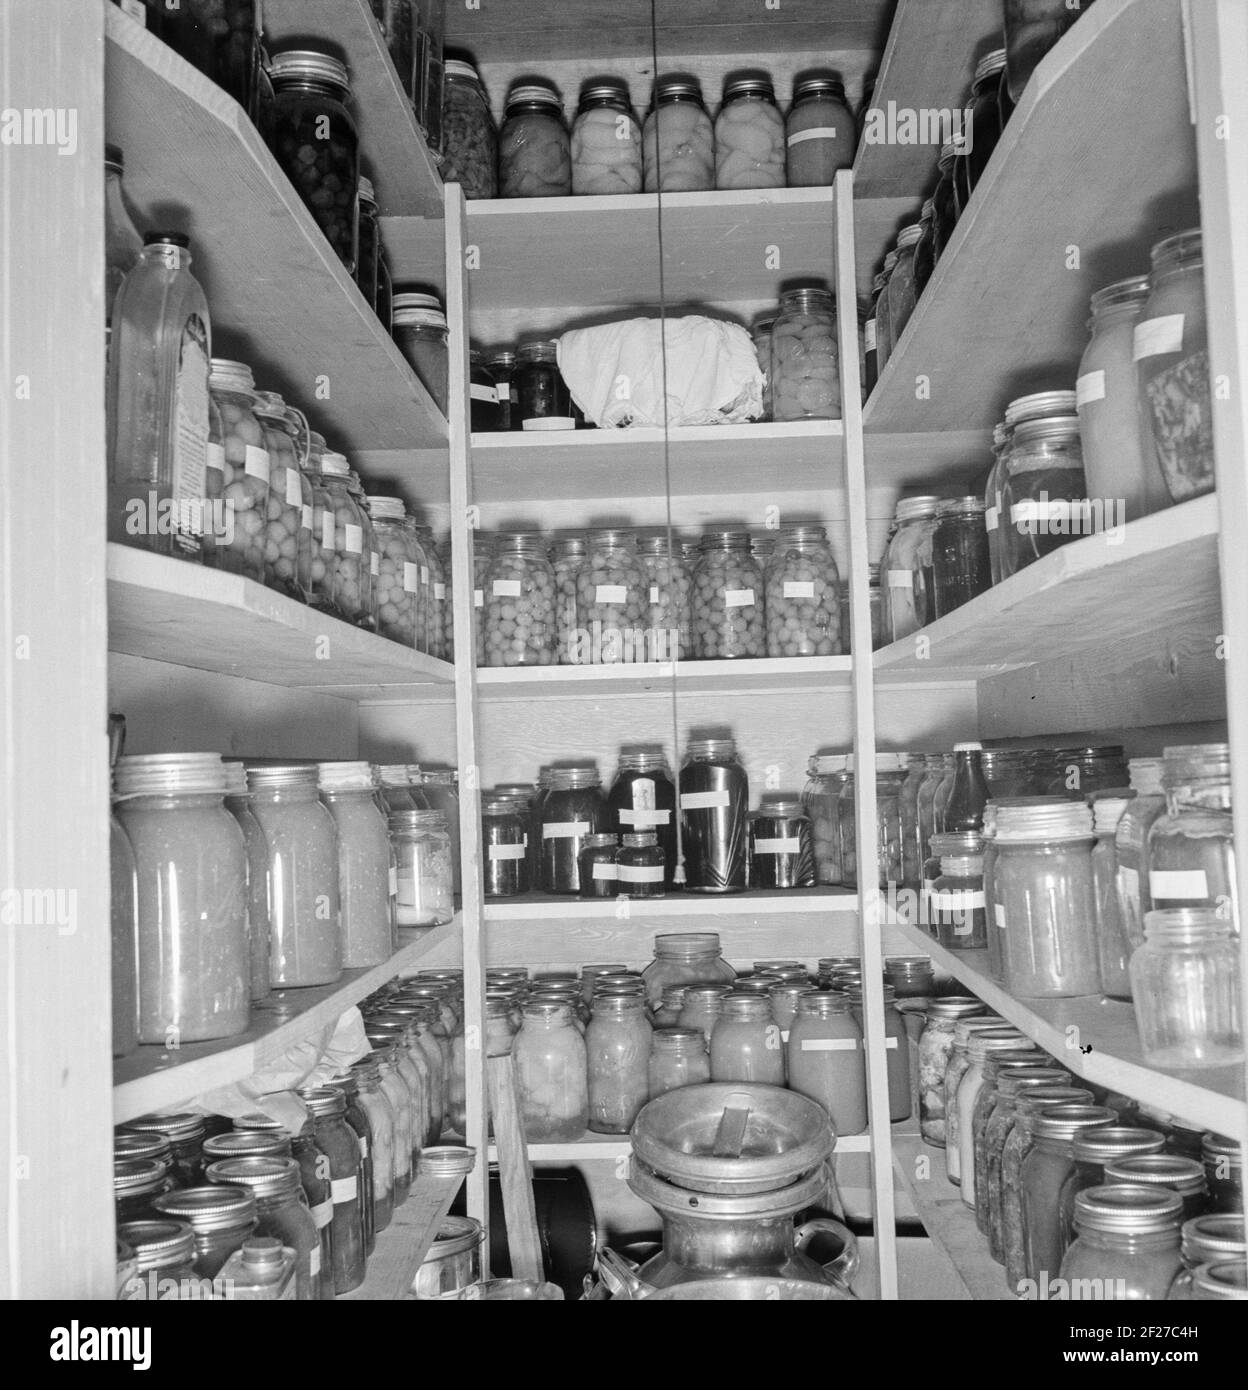 Mrs. Granger's storeroom. She has 500-600 quarts of canned food. 'You never know what may happen.' Yamhill farms. (FSA - Farm Security Administration). Yamhill County, Williamette Valley, Oregon . October 1939 . Photograph by Dorothea Lange Stock Photo